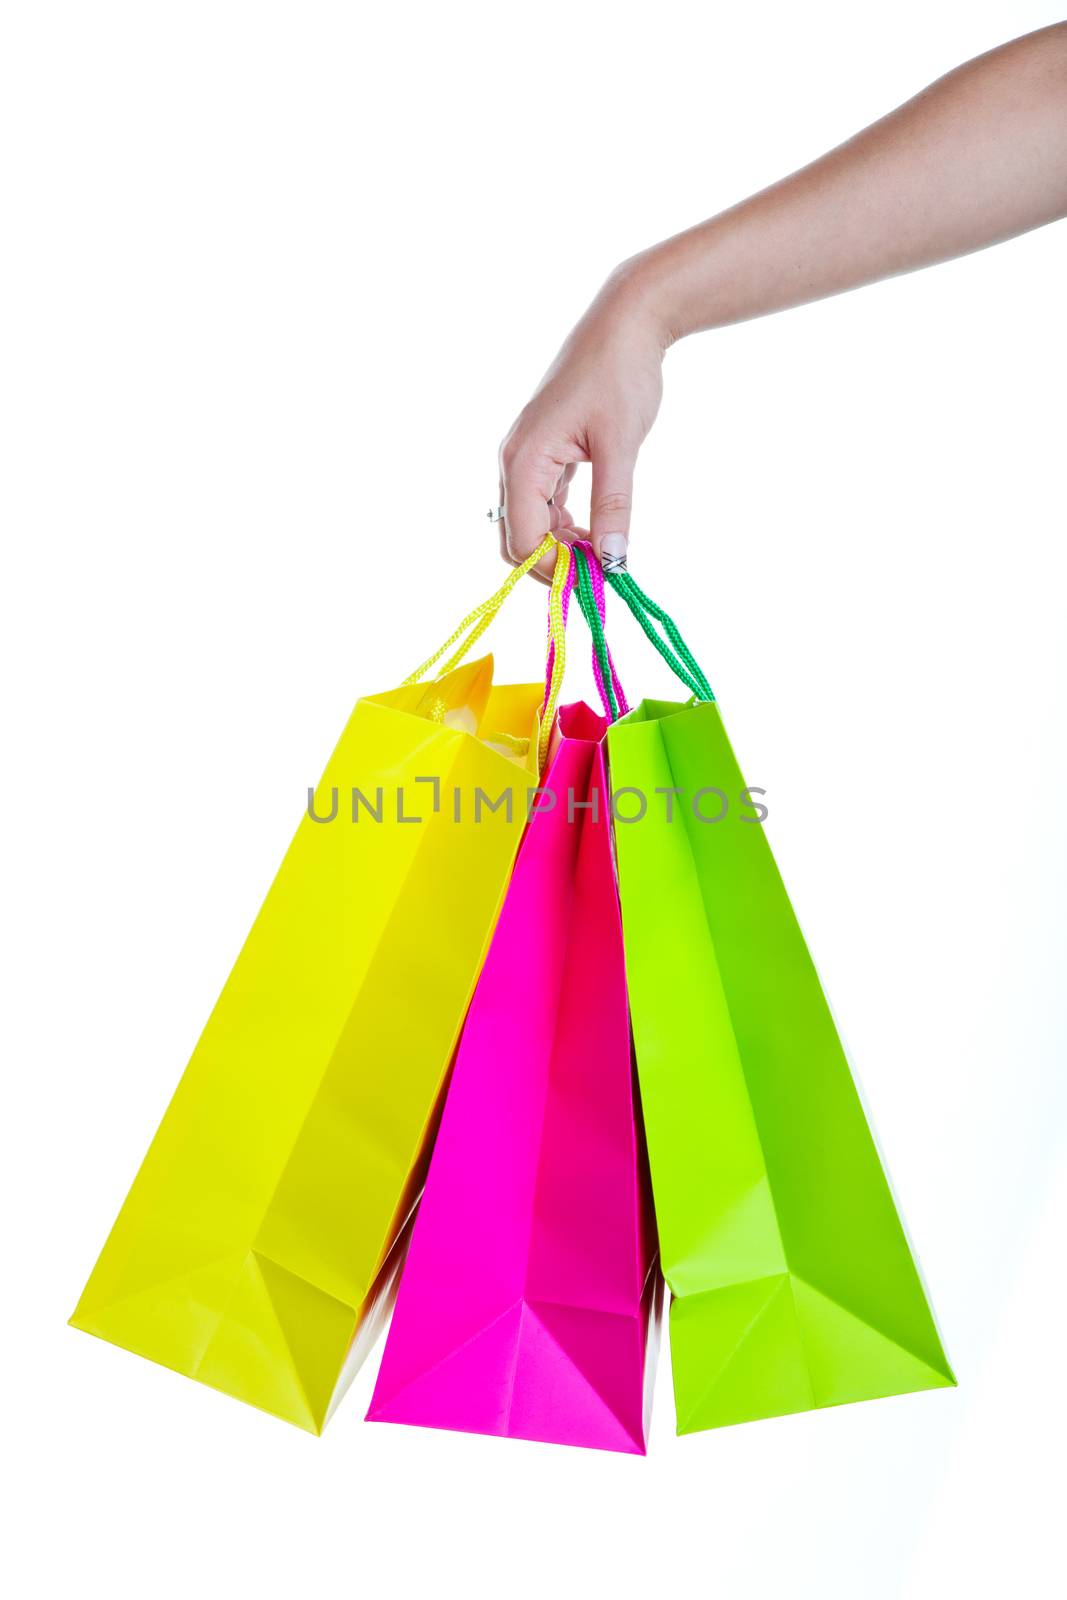 Shopper holding shopping bags, in bright spring colors.  Shot on white background.